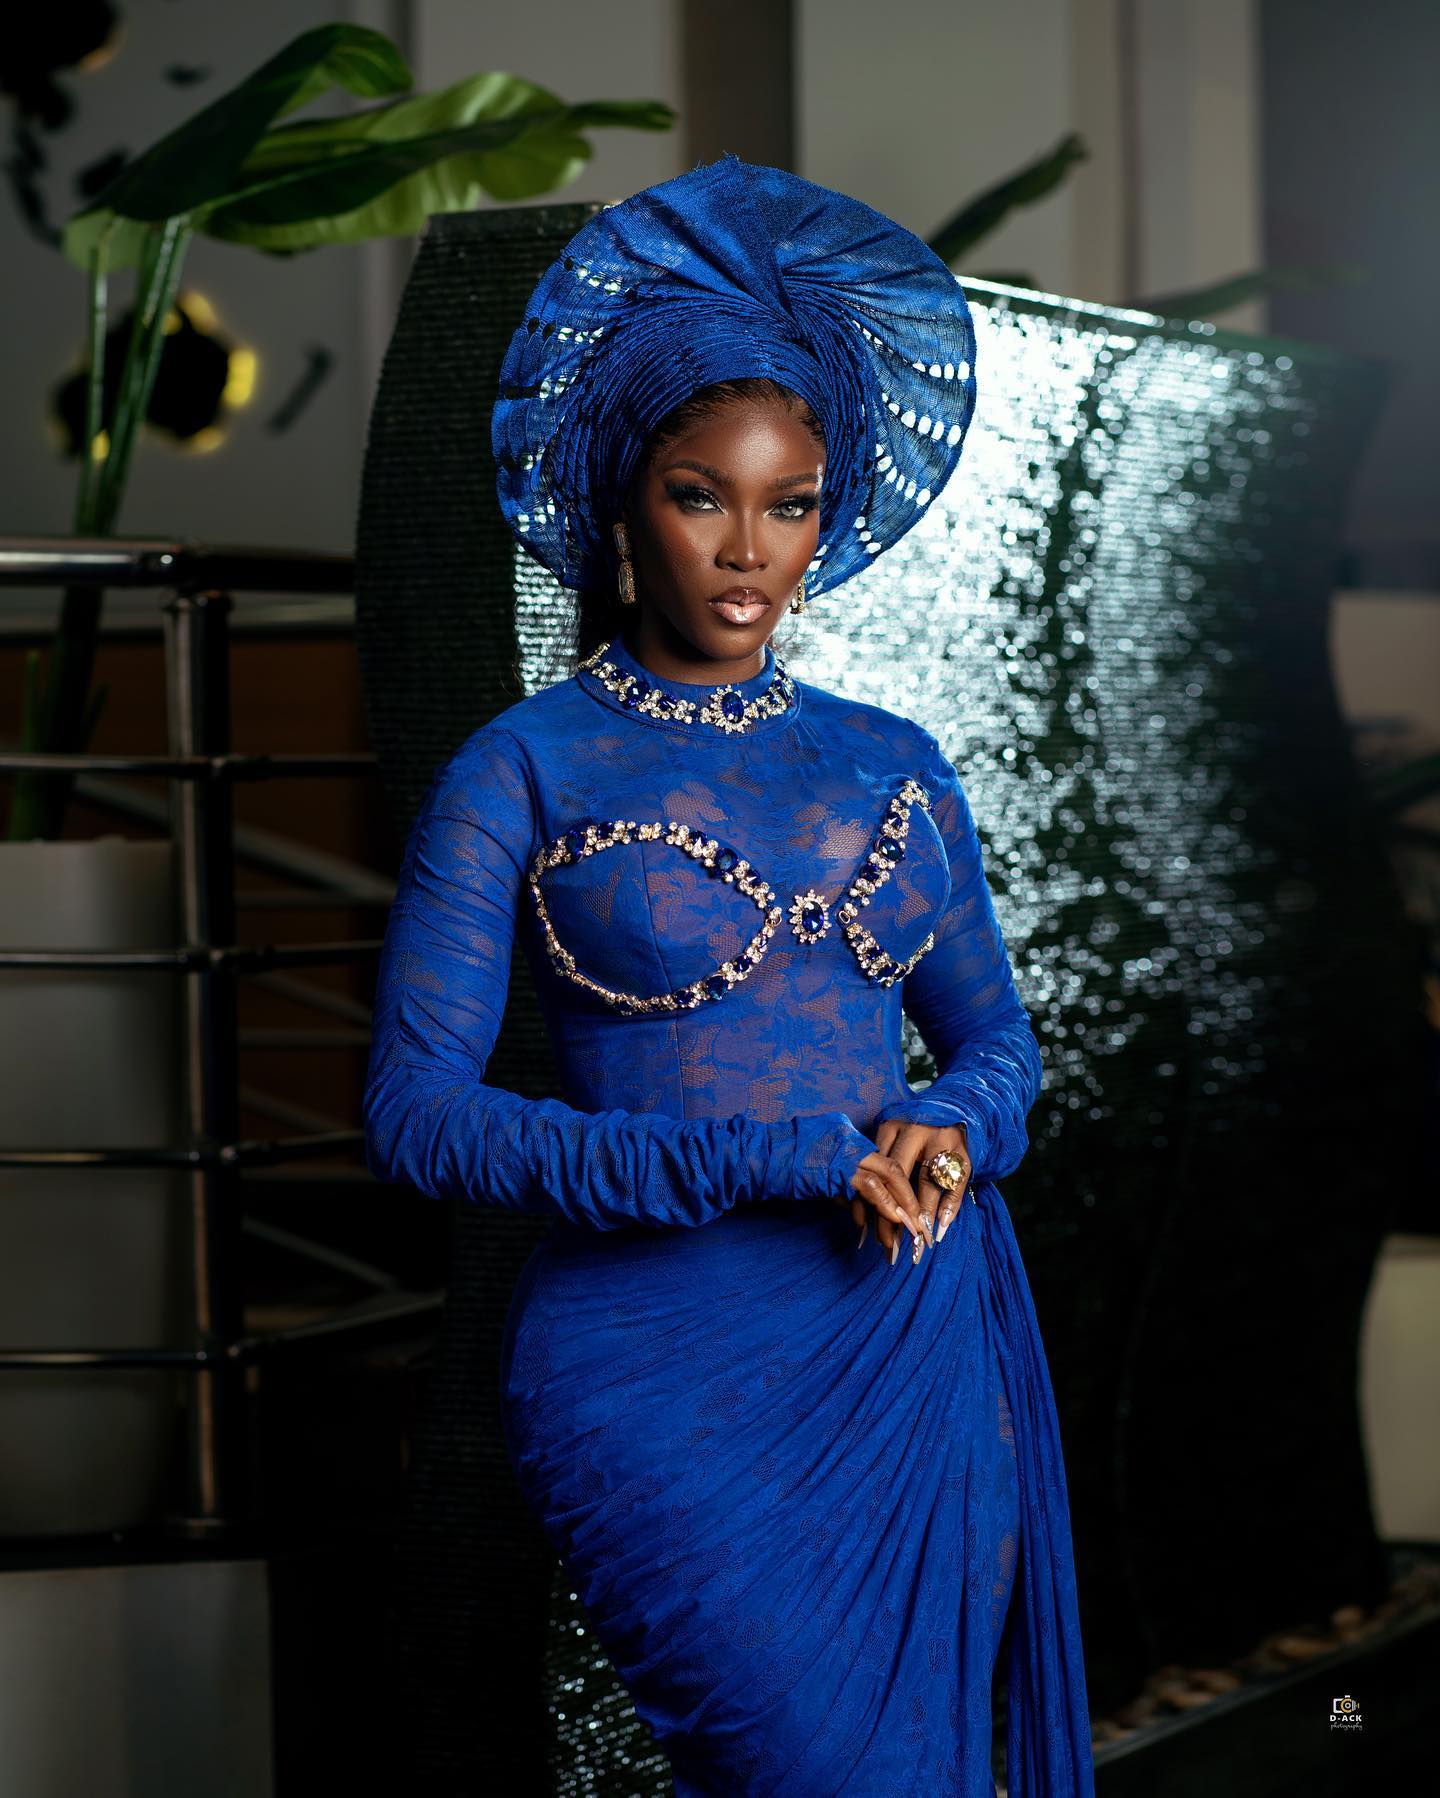 Where to Find and Buy African Dress Lace marriage 